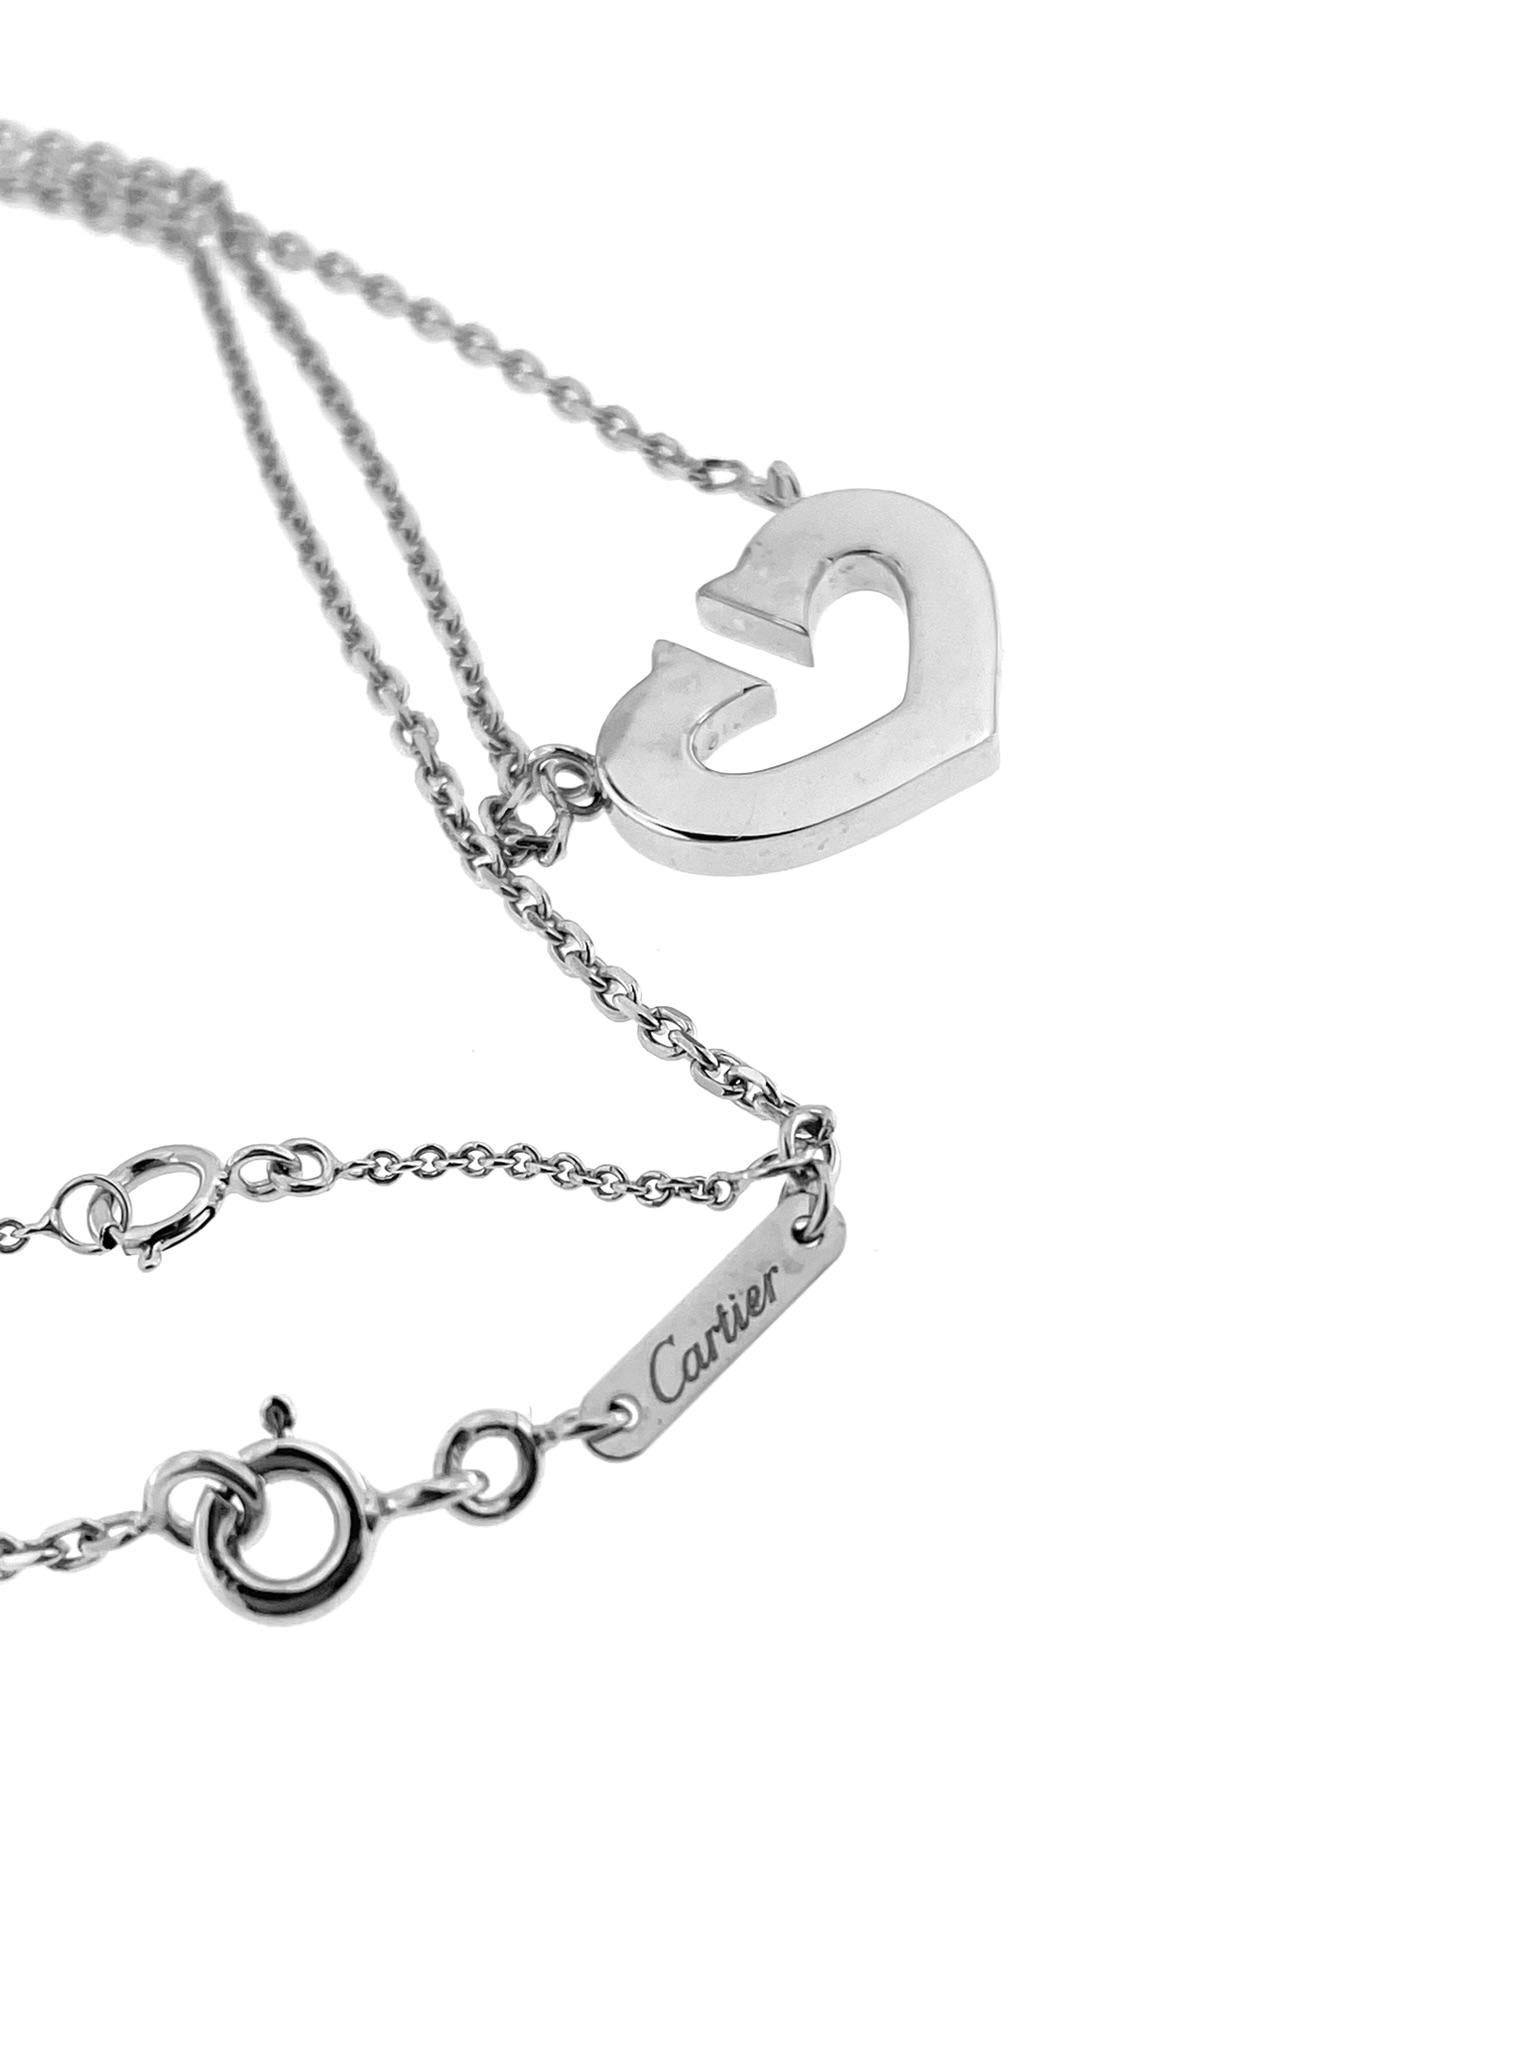 Cartier C Collection Heart Necklace 18 karat White Gold For Sale 1